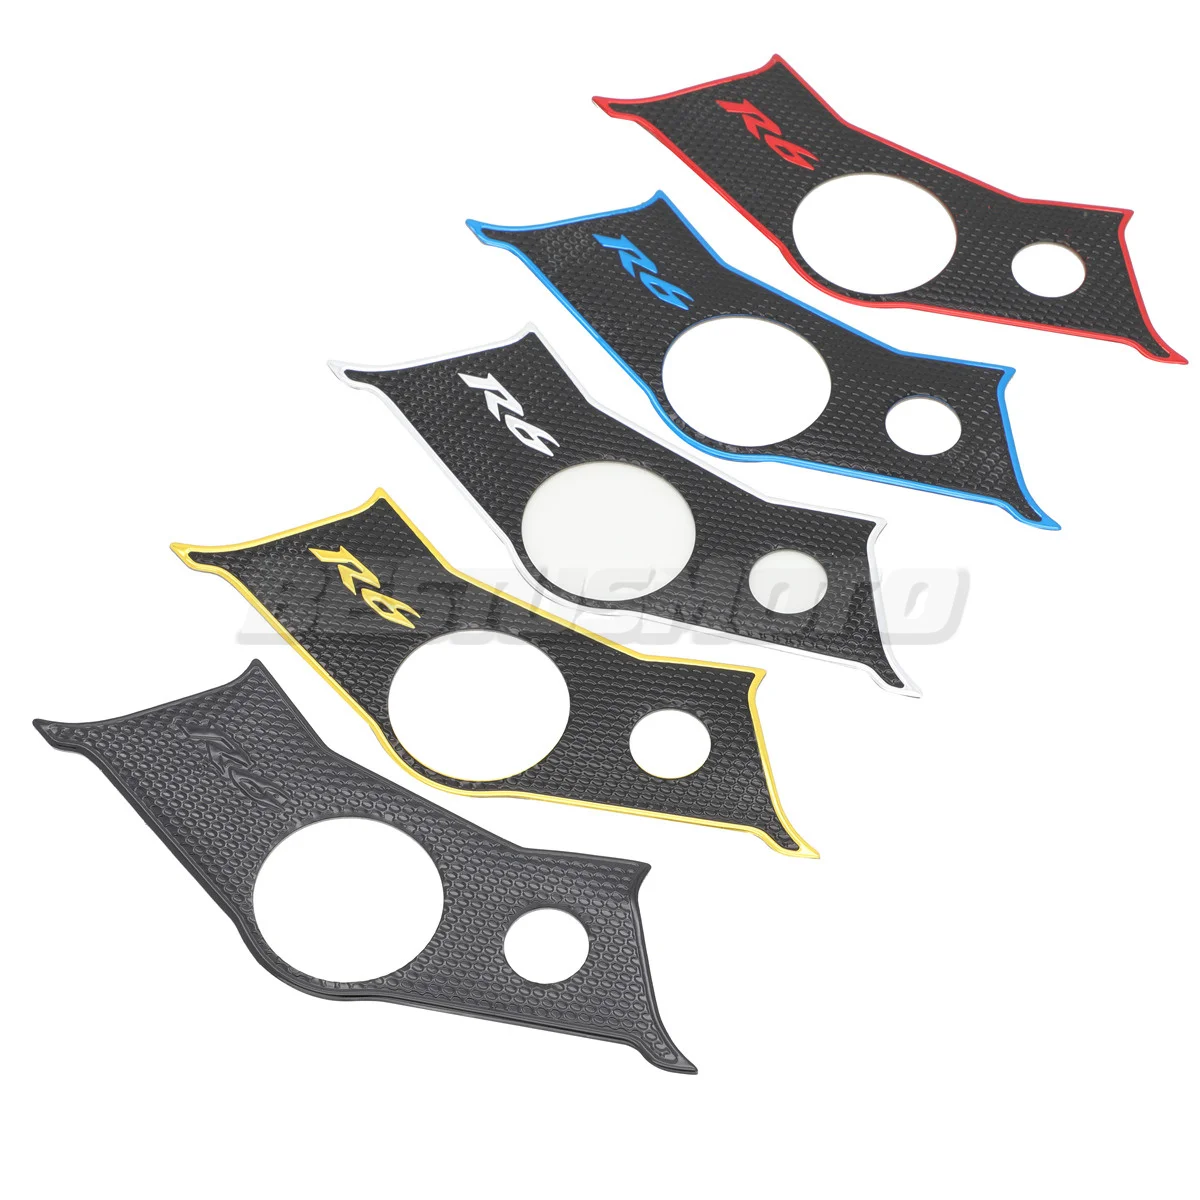 Motorcycle Decal Pad Triple Tree Top Clamp Upper Front End Waterproof Sticker For Yamaha YZF600 YZF-R6 YZF R6 2003 2004 2005